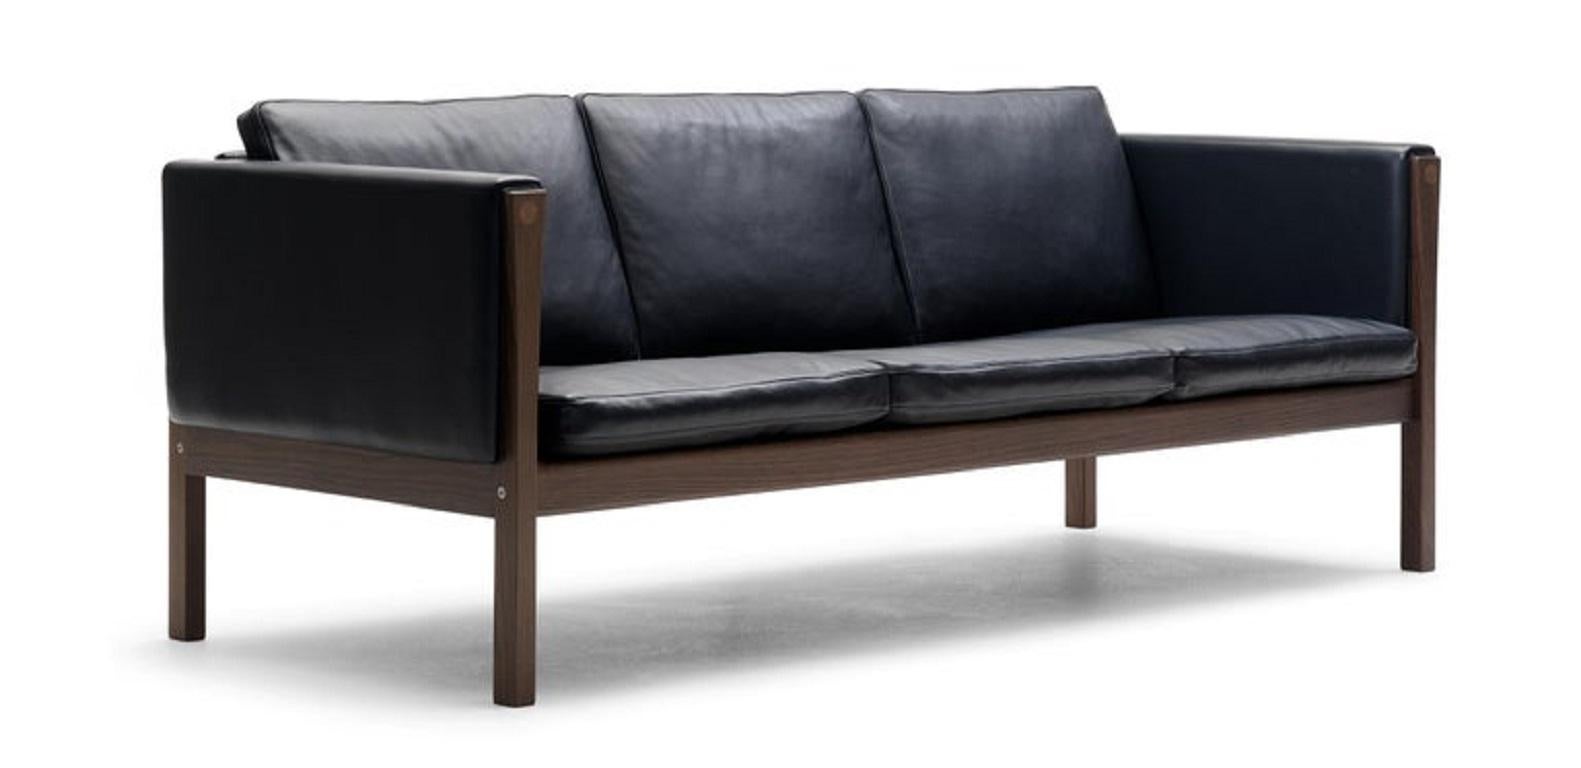 Hans J. Wegner designed the CH163 sofa in 1965, using a down filling for luxurious comfort. This large, three-seat sofa neatly exemplifies how Wegner often highlighted structural details to great effect.

Additional info:
Material: Leather and